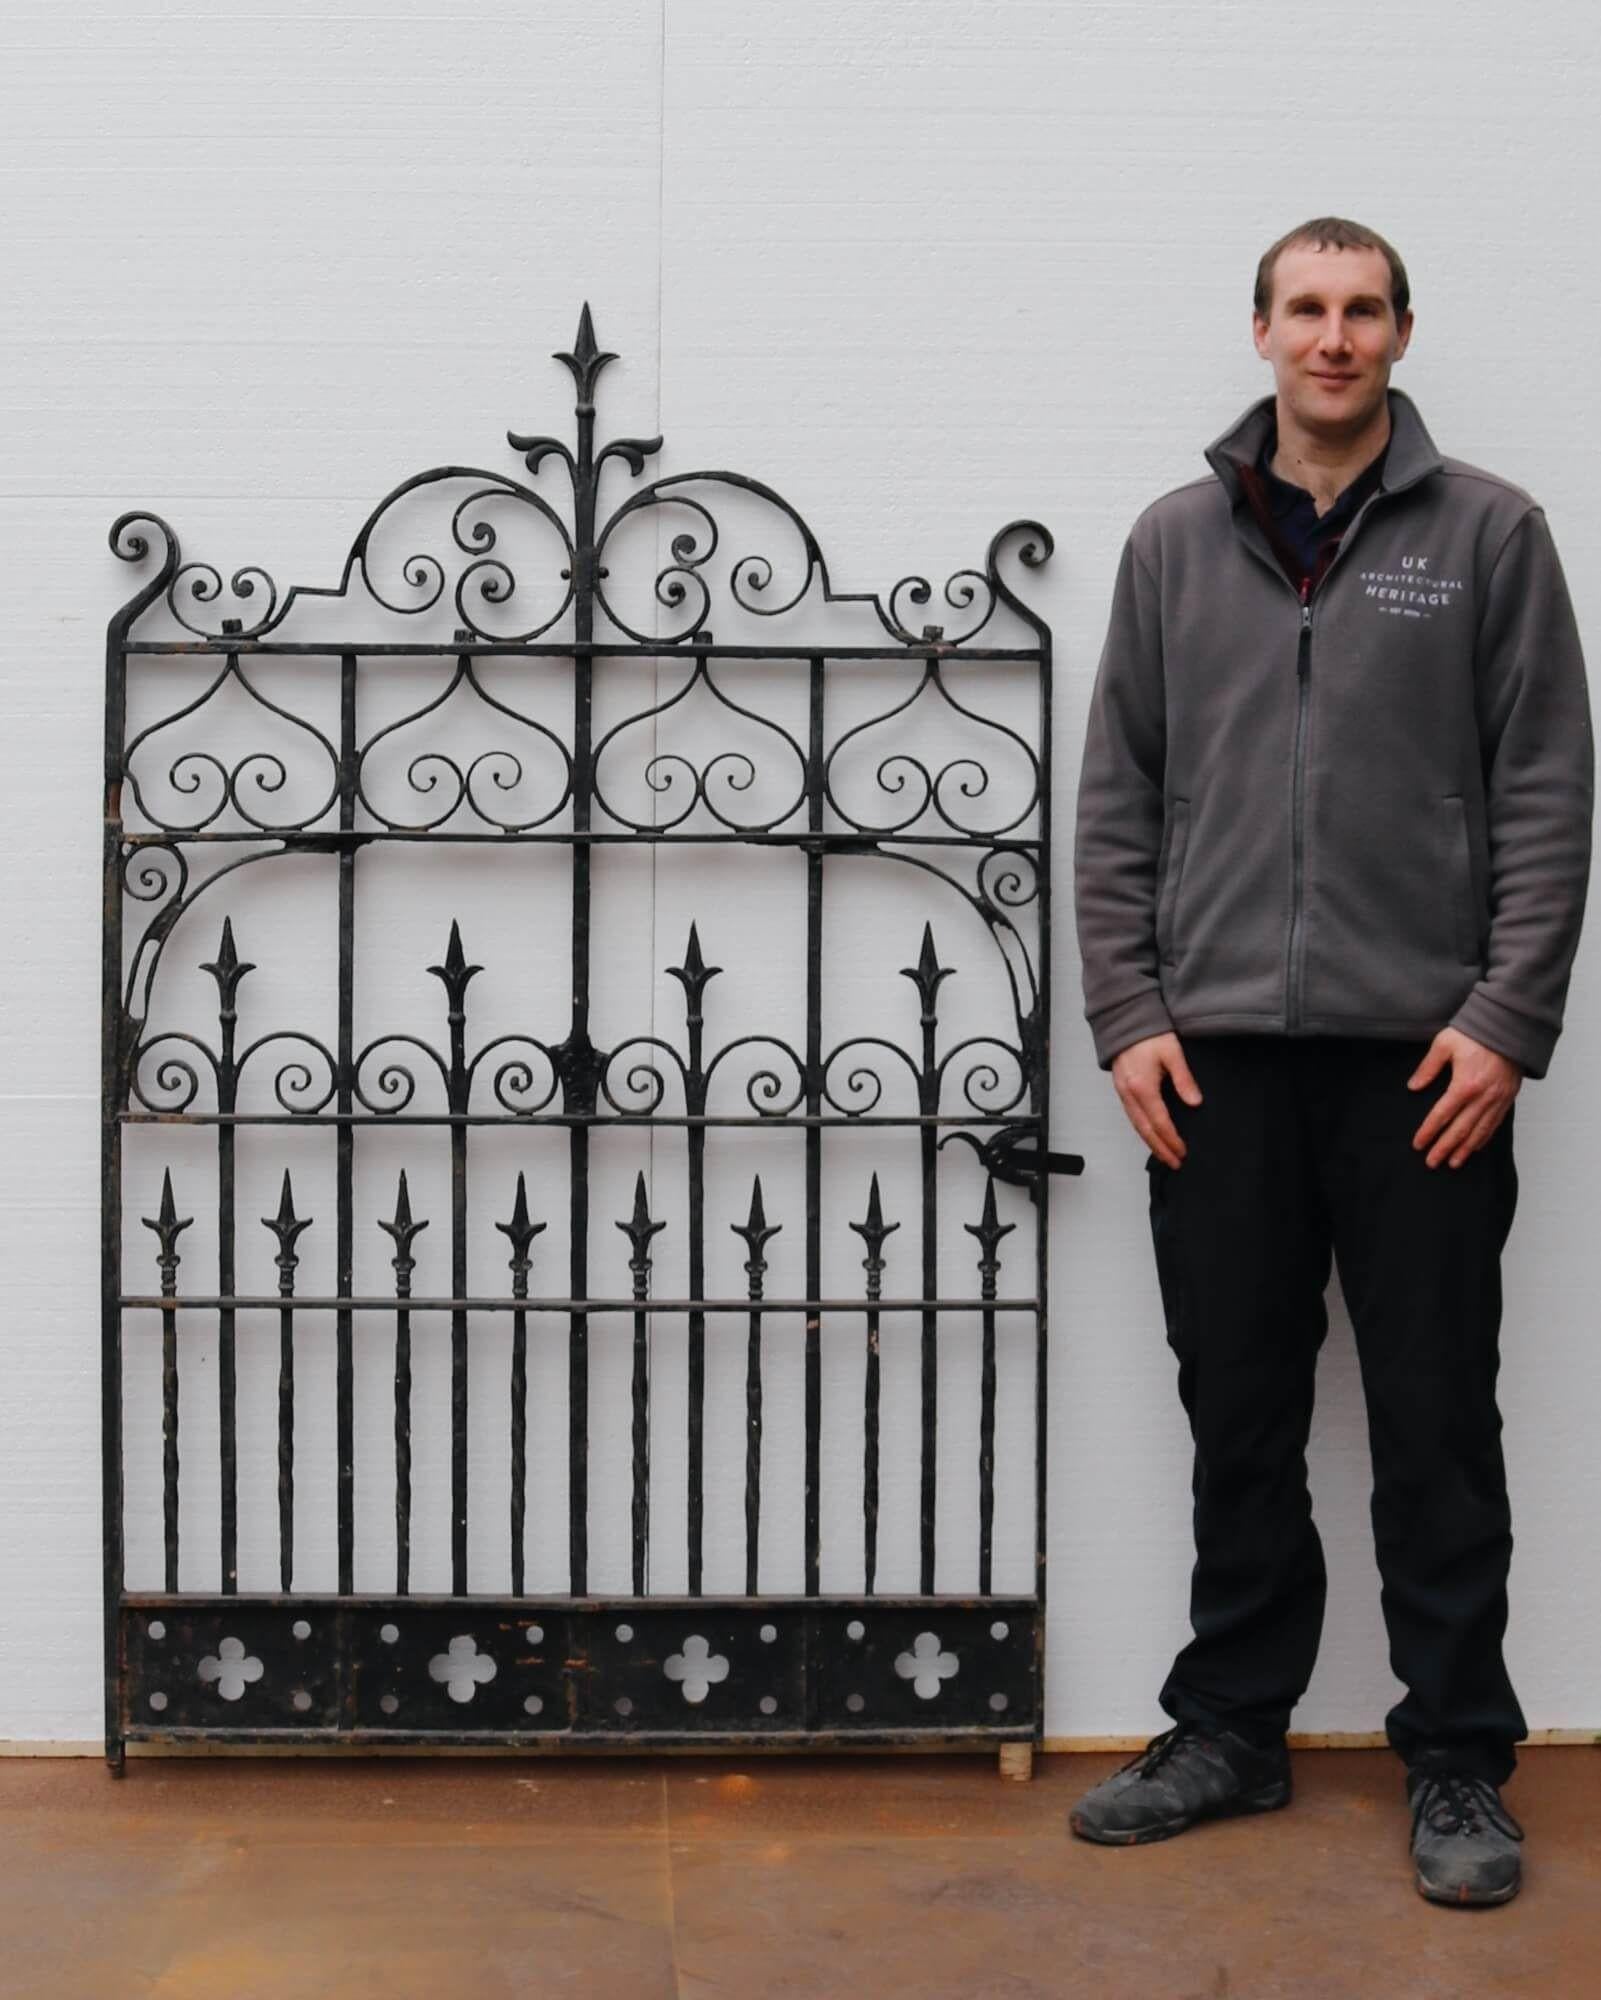 Made in the late 19th century, this large Victorian wrought iron pedestrian gate looks as timeless in a 21st century country garden as it did when it was made in England in the late 1800s. Standing at 173 cm tall, it offers security as well as